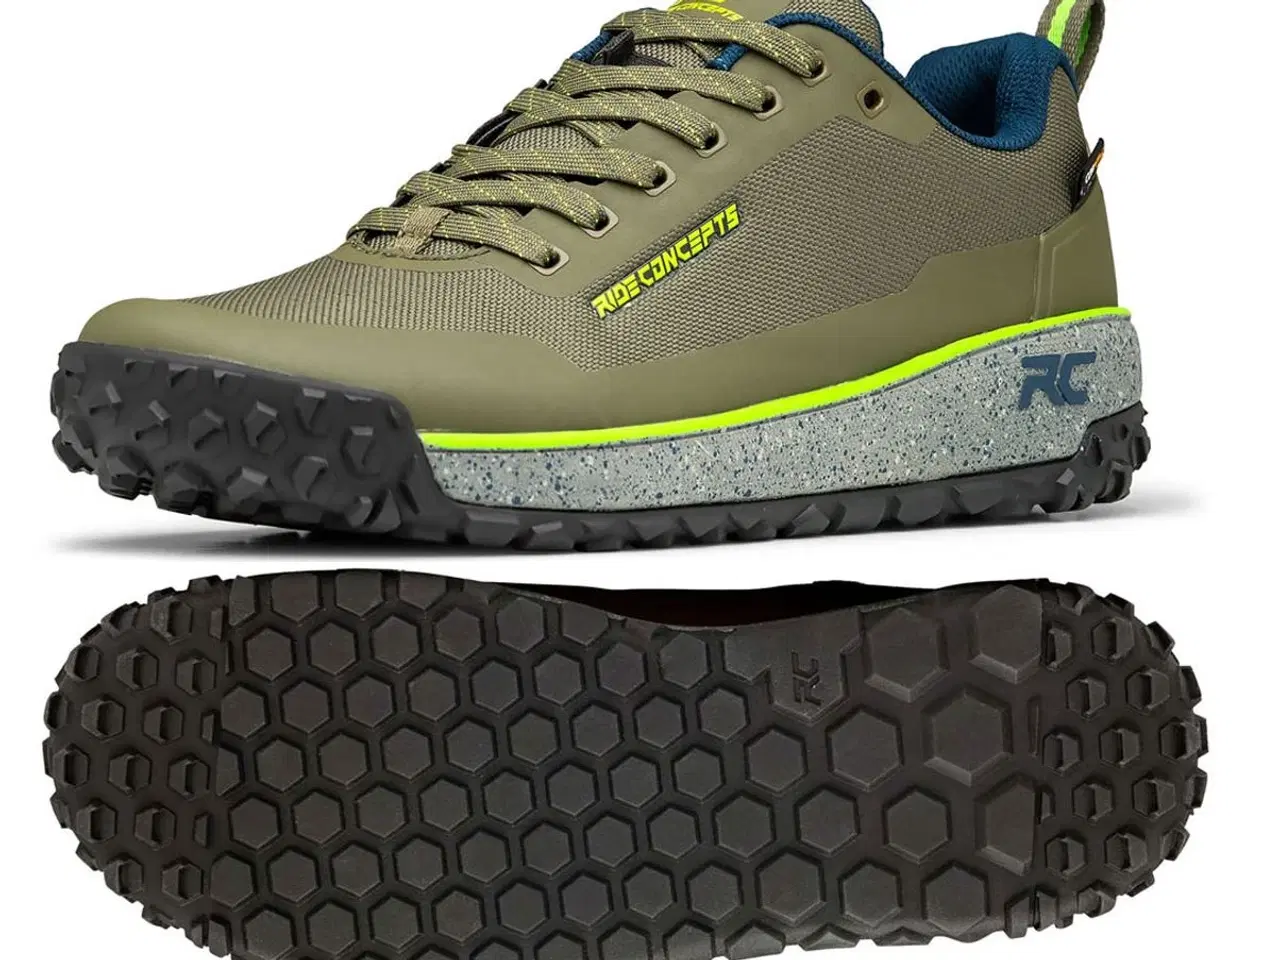 Billede 1 - Ride Concepts Tallac Olive/Lime